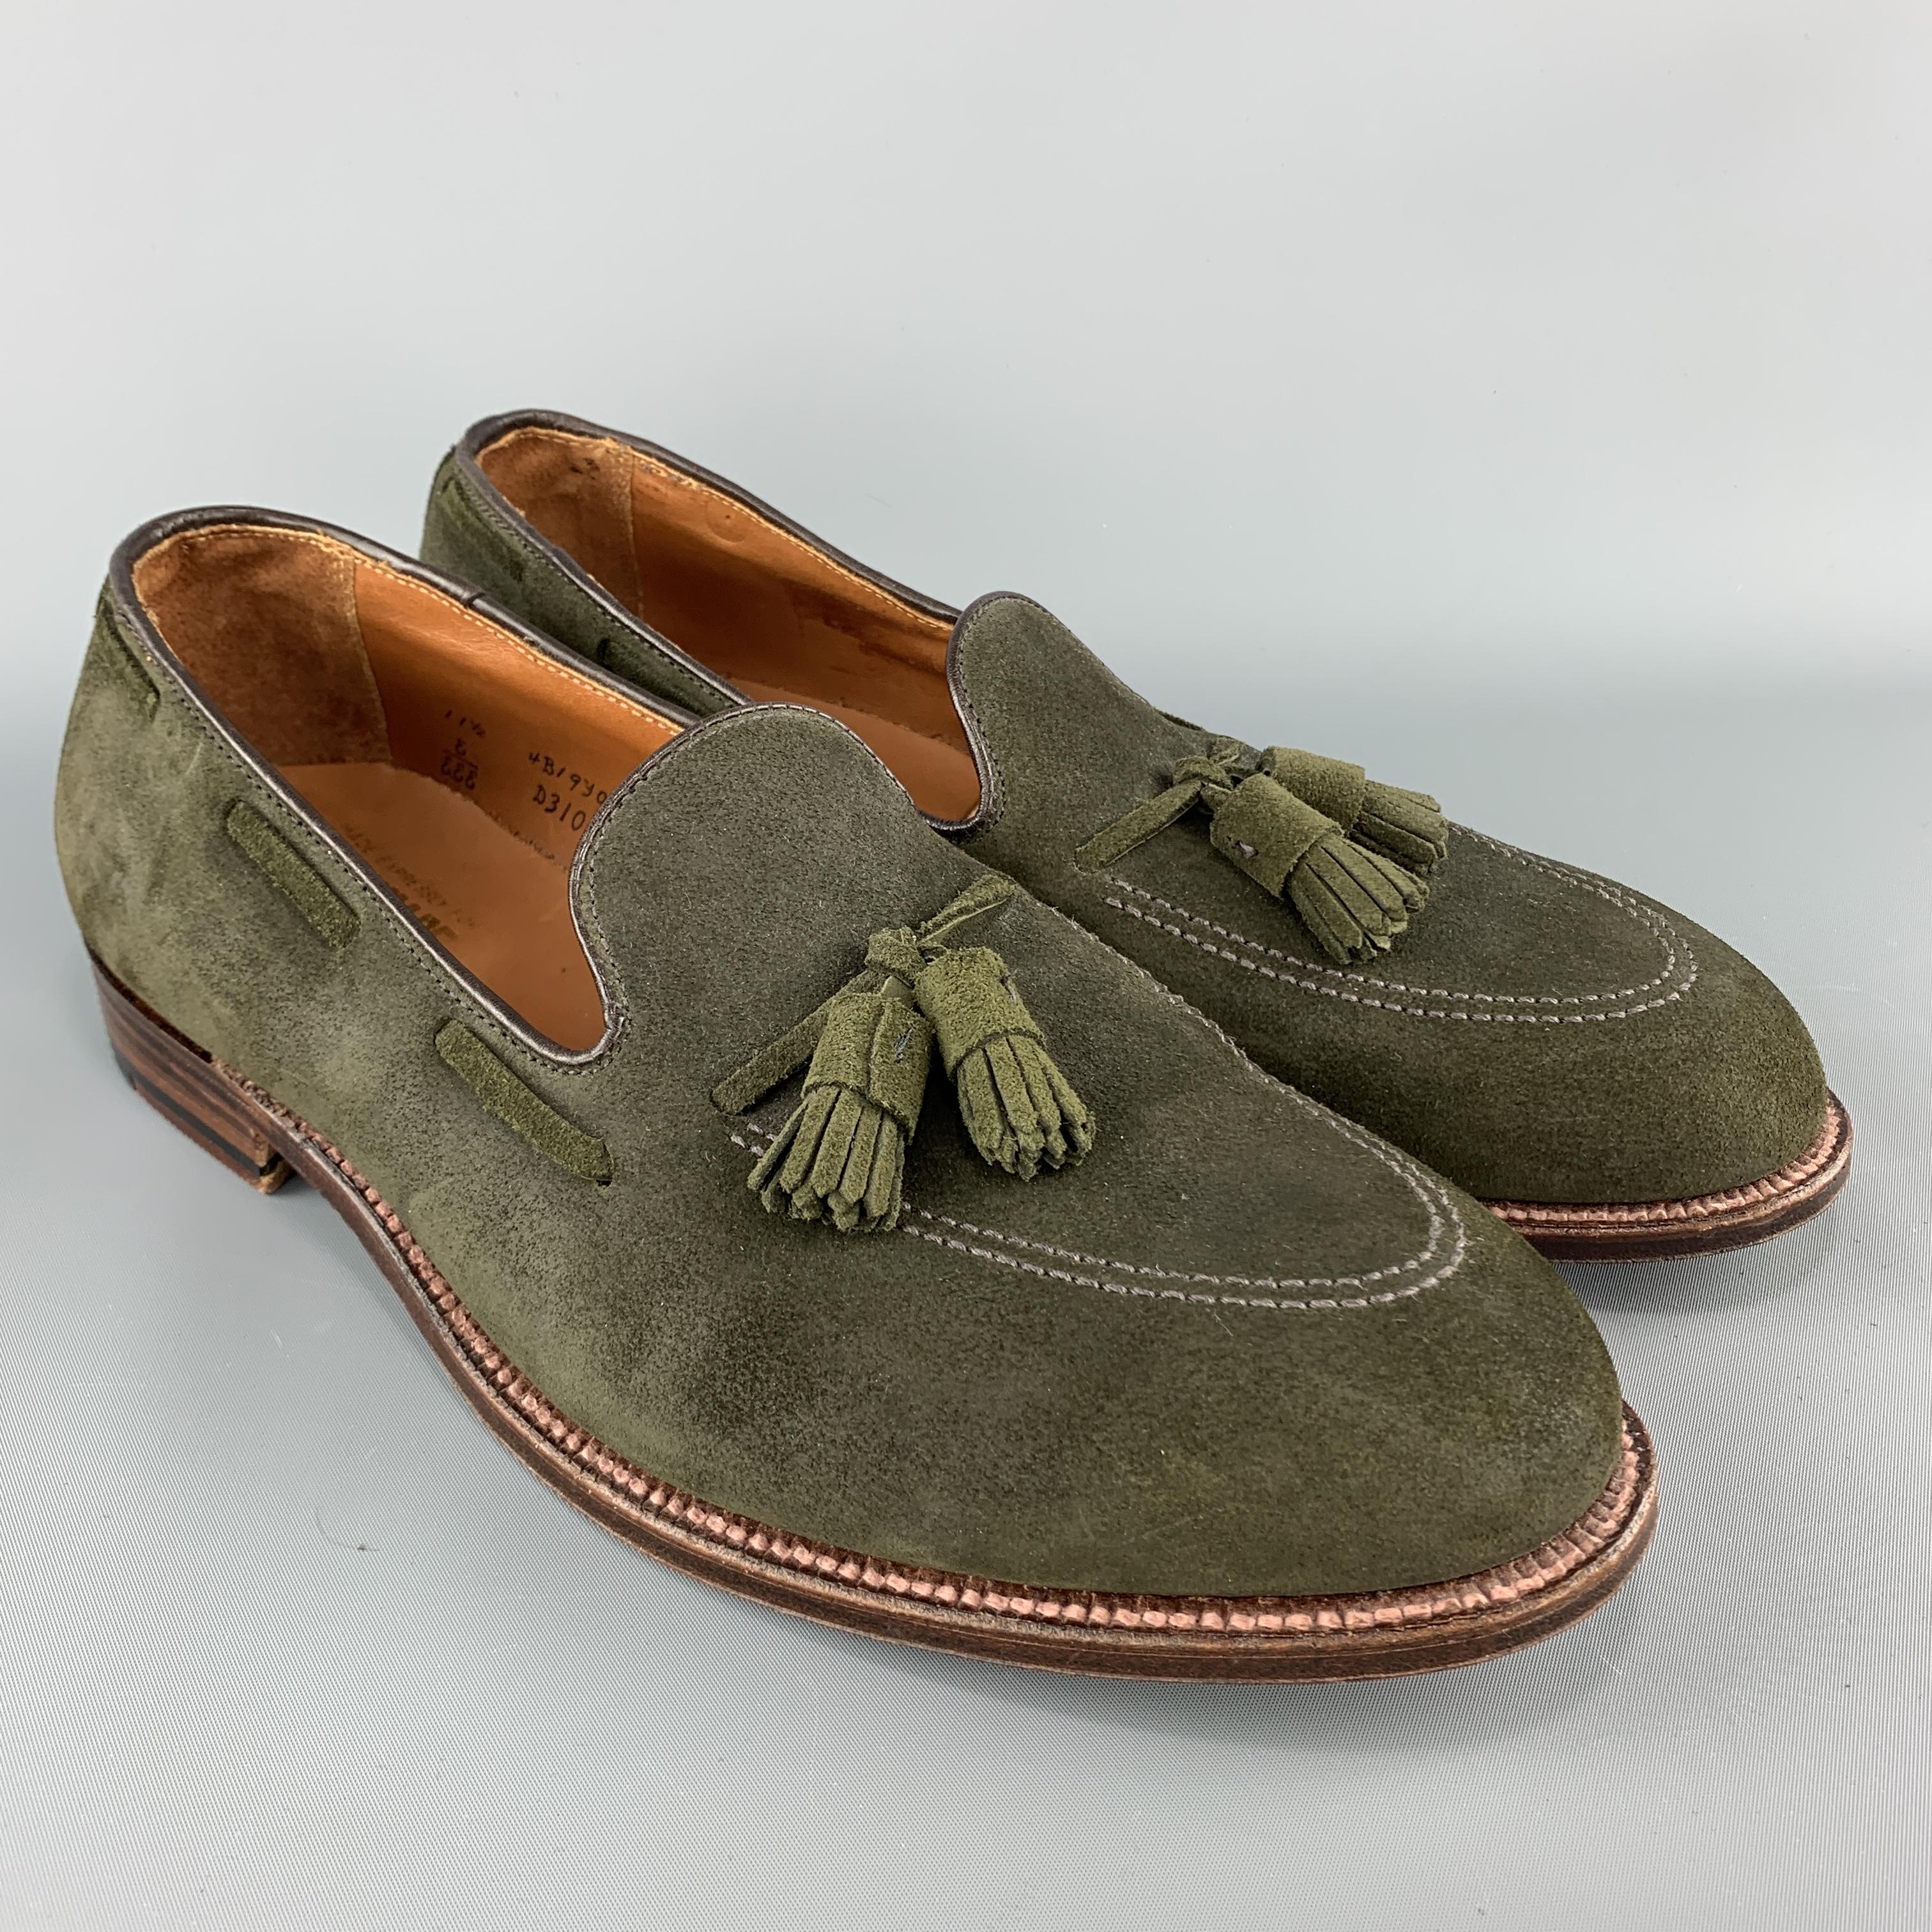 ALDEN for UNIONMADE loafers come in earthy green suede with laced piping and double tassels.  Made in USA.

Very Good Pre-Owned Condition.
Marked: US 11.5

Outsole: 12.5 x 4.5 in.